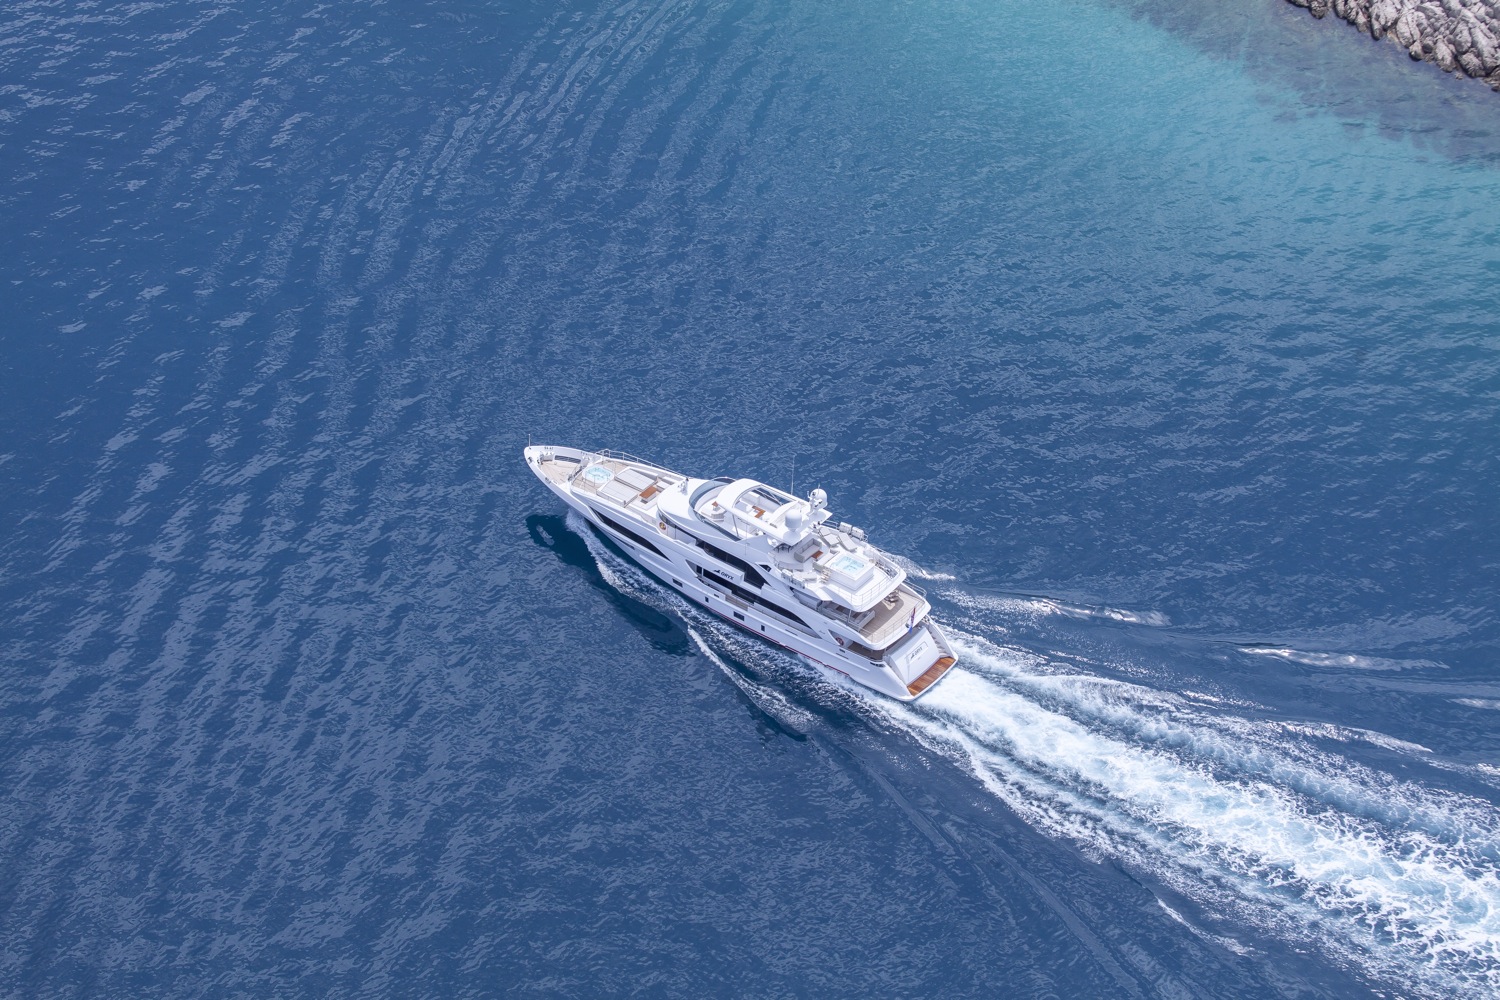 Aerial View Of The Yacht Running